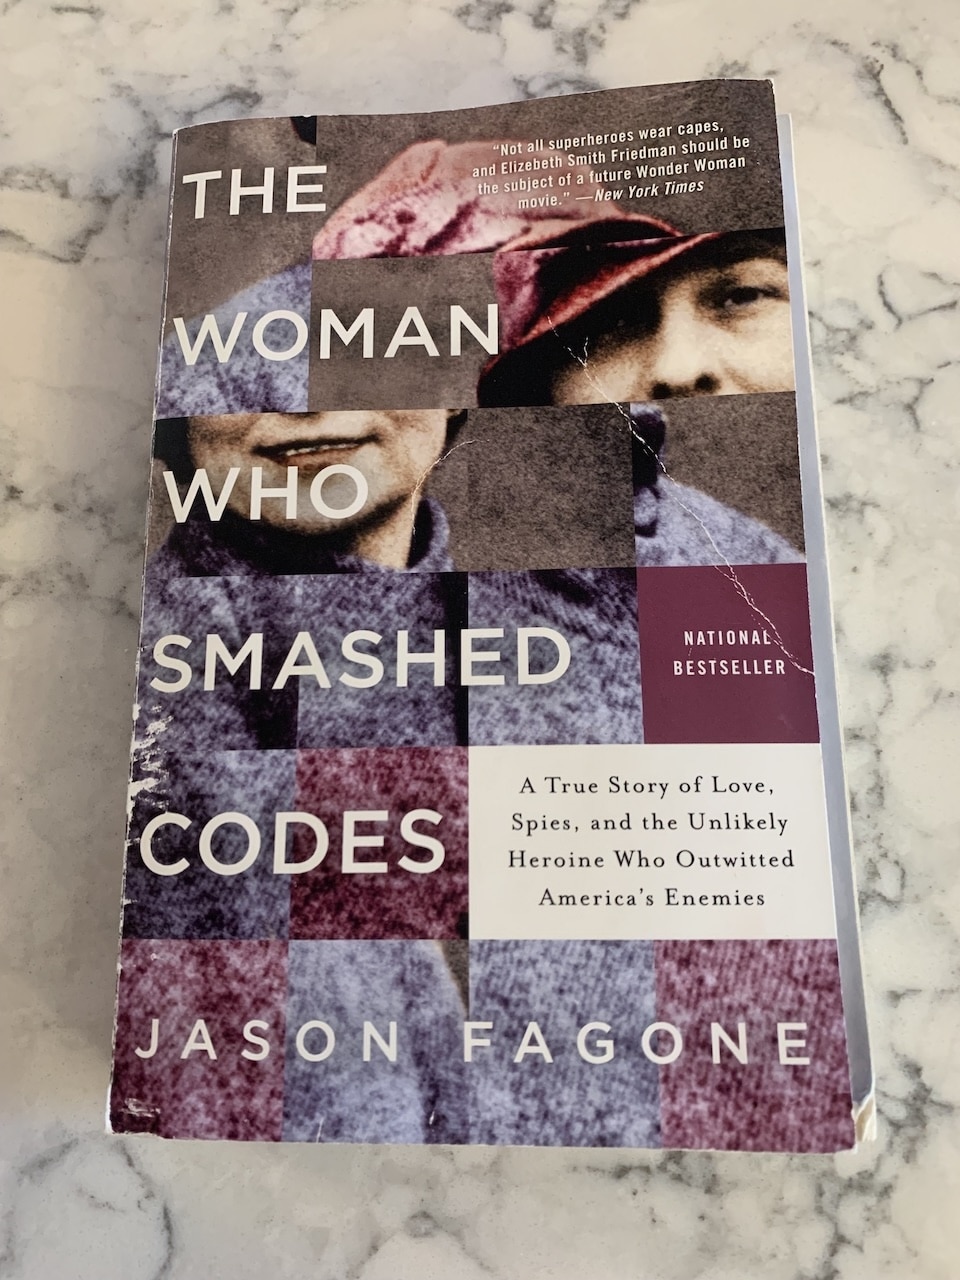 The Woman Who Smashed Codes Book for Review